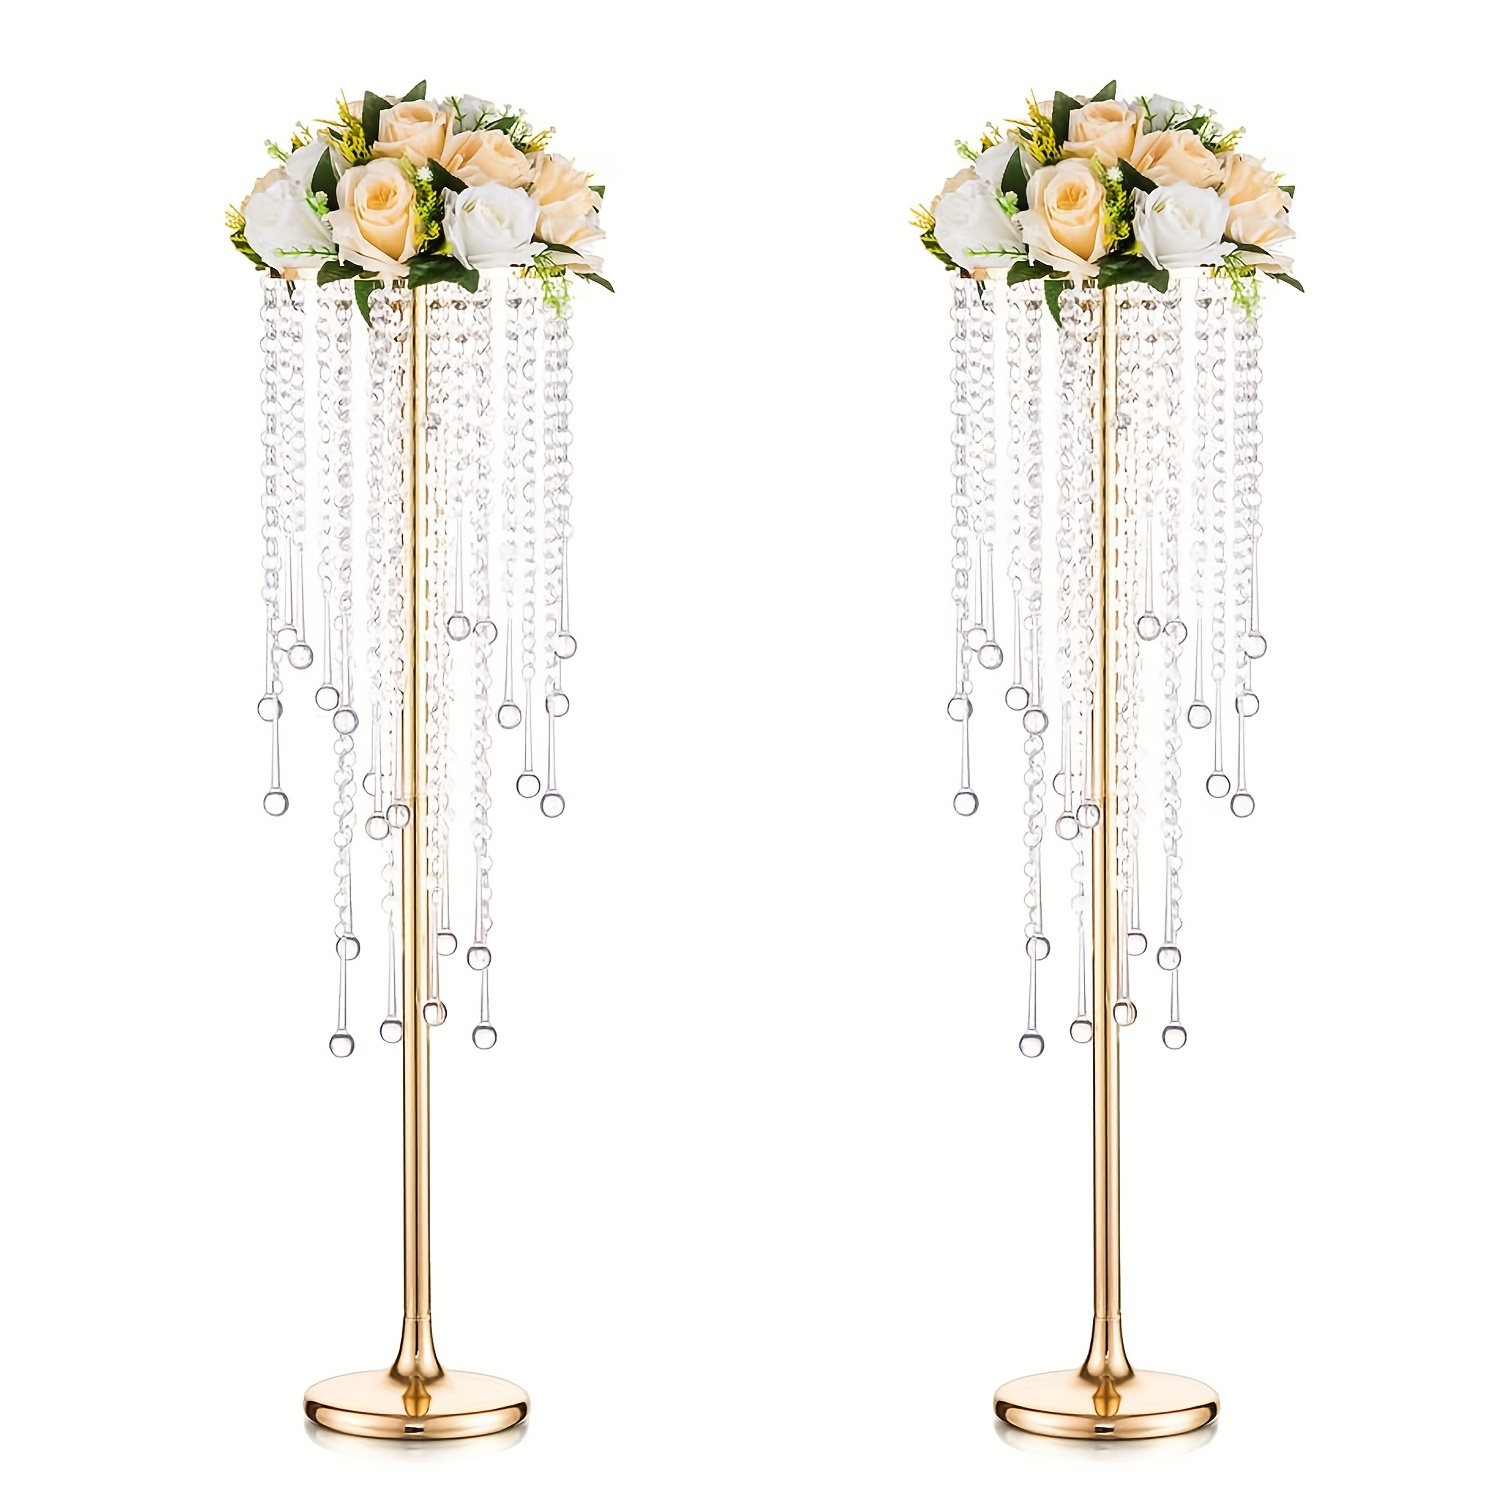 

Set/2pcs, Tall Vases Wedding Centerpieces For Tables Golden Flower Vase With Chandelier Crystal, Centerpiece Table Decorations, Metal Flower Stand For Wedding, Reception, Party, Events, Home